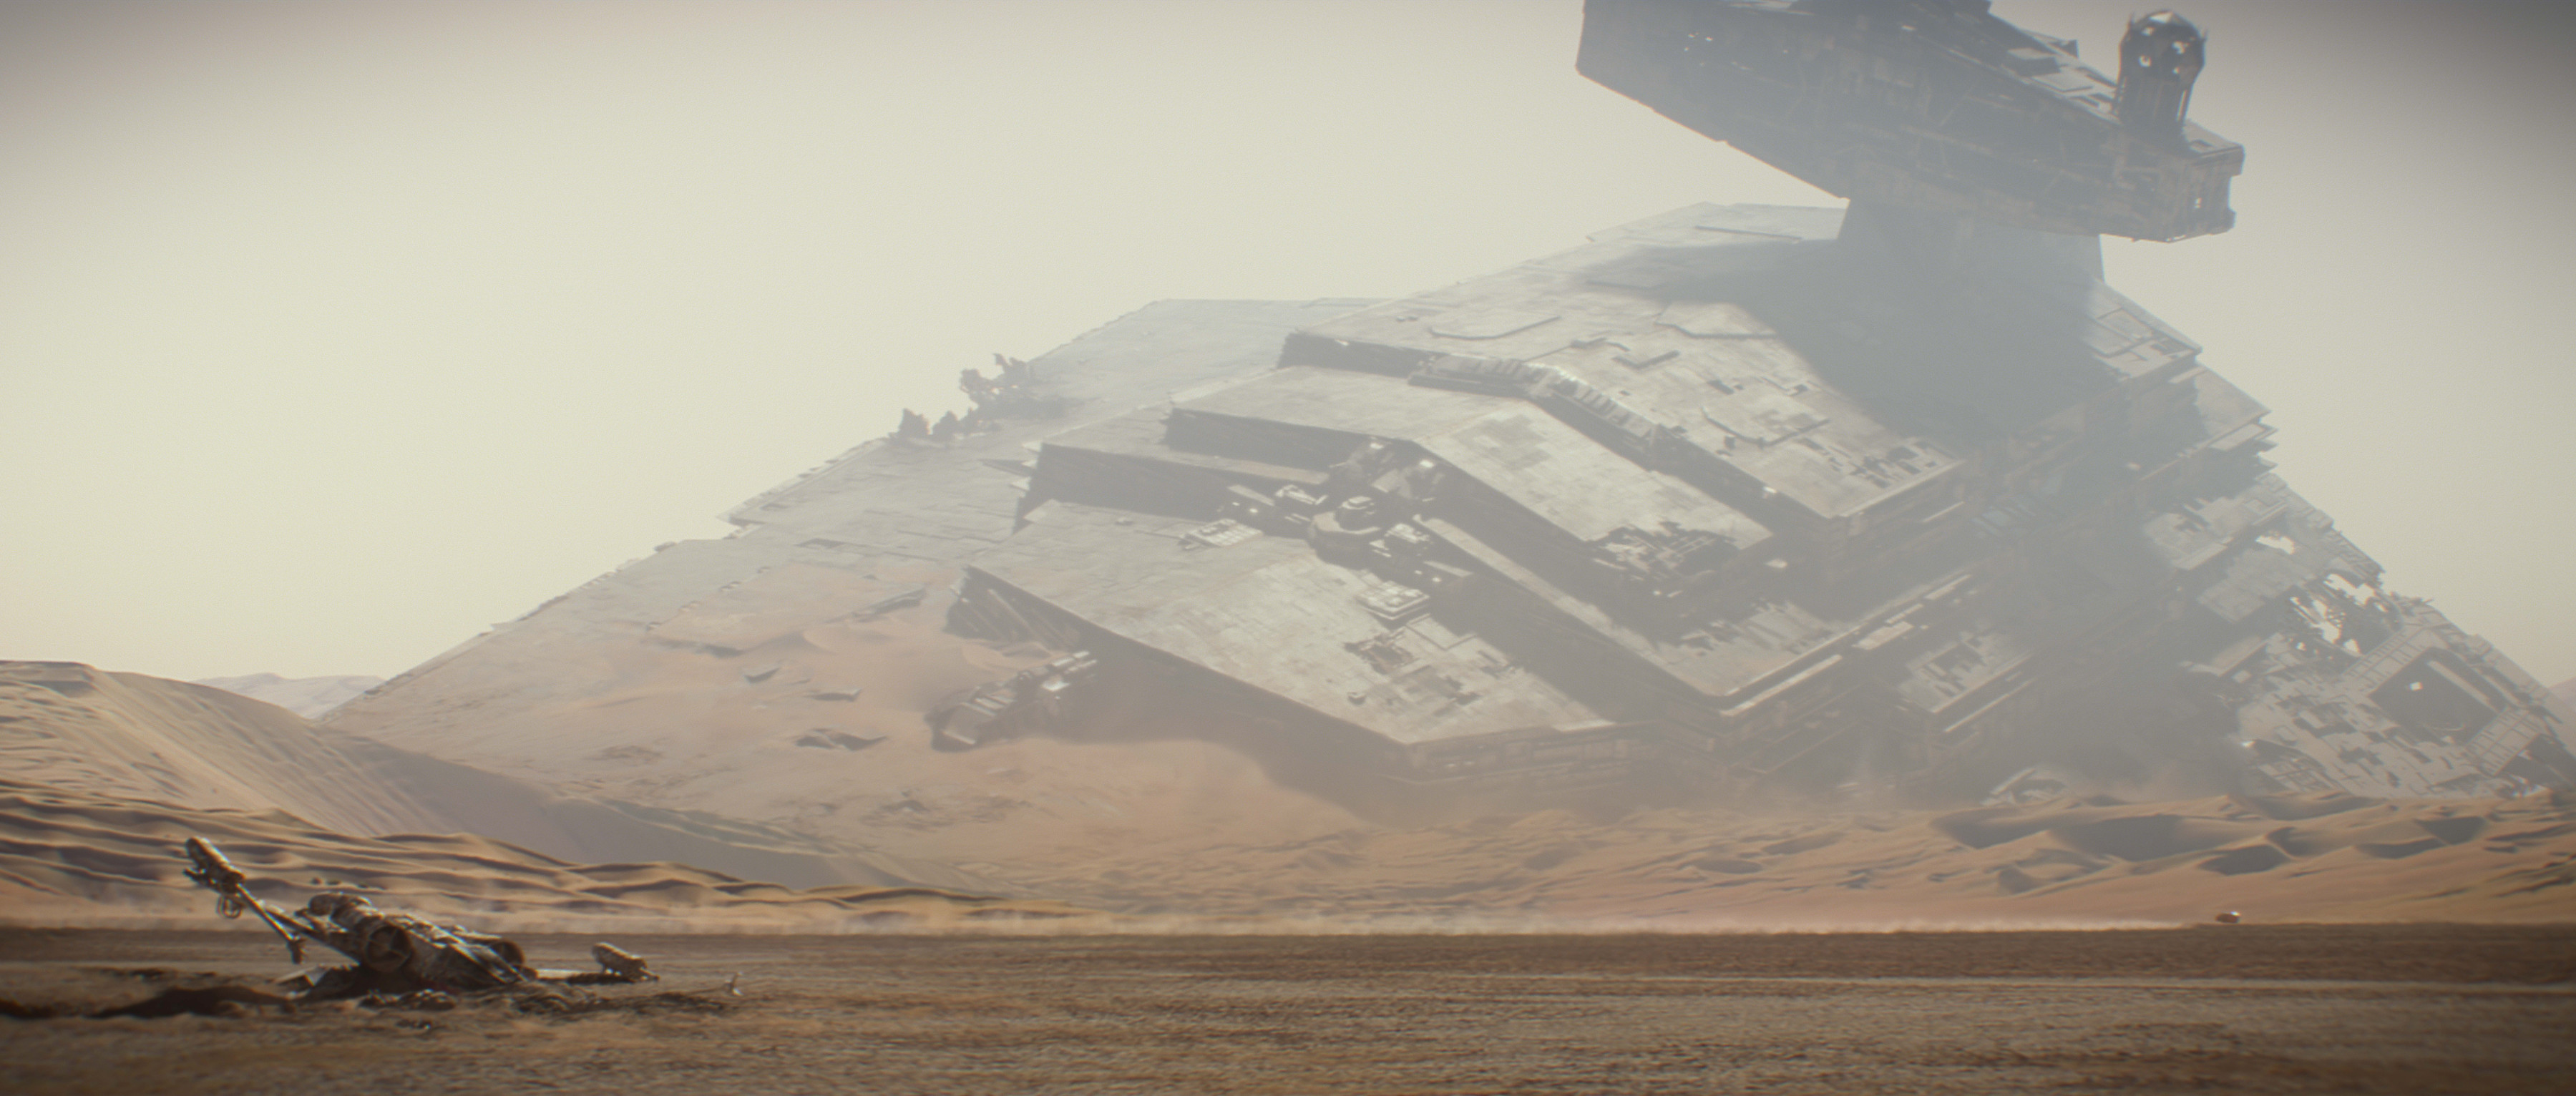 Why the Star Destroyer looks different in the Rogue One A Star Wars Story trailer